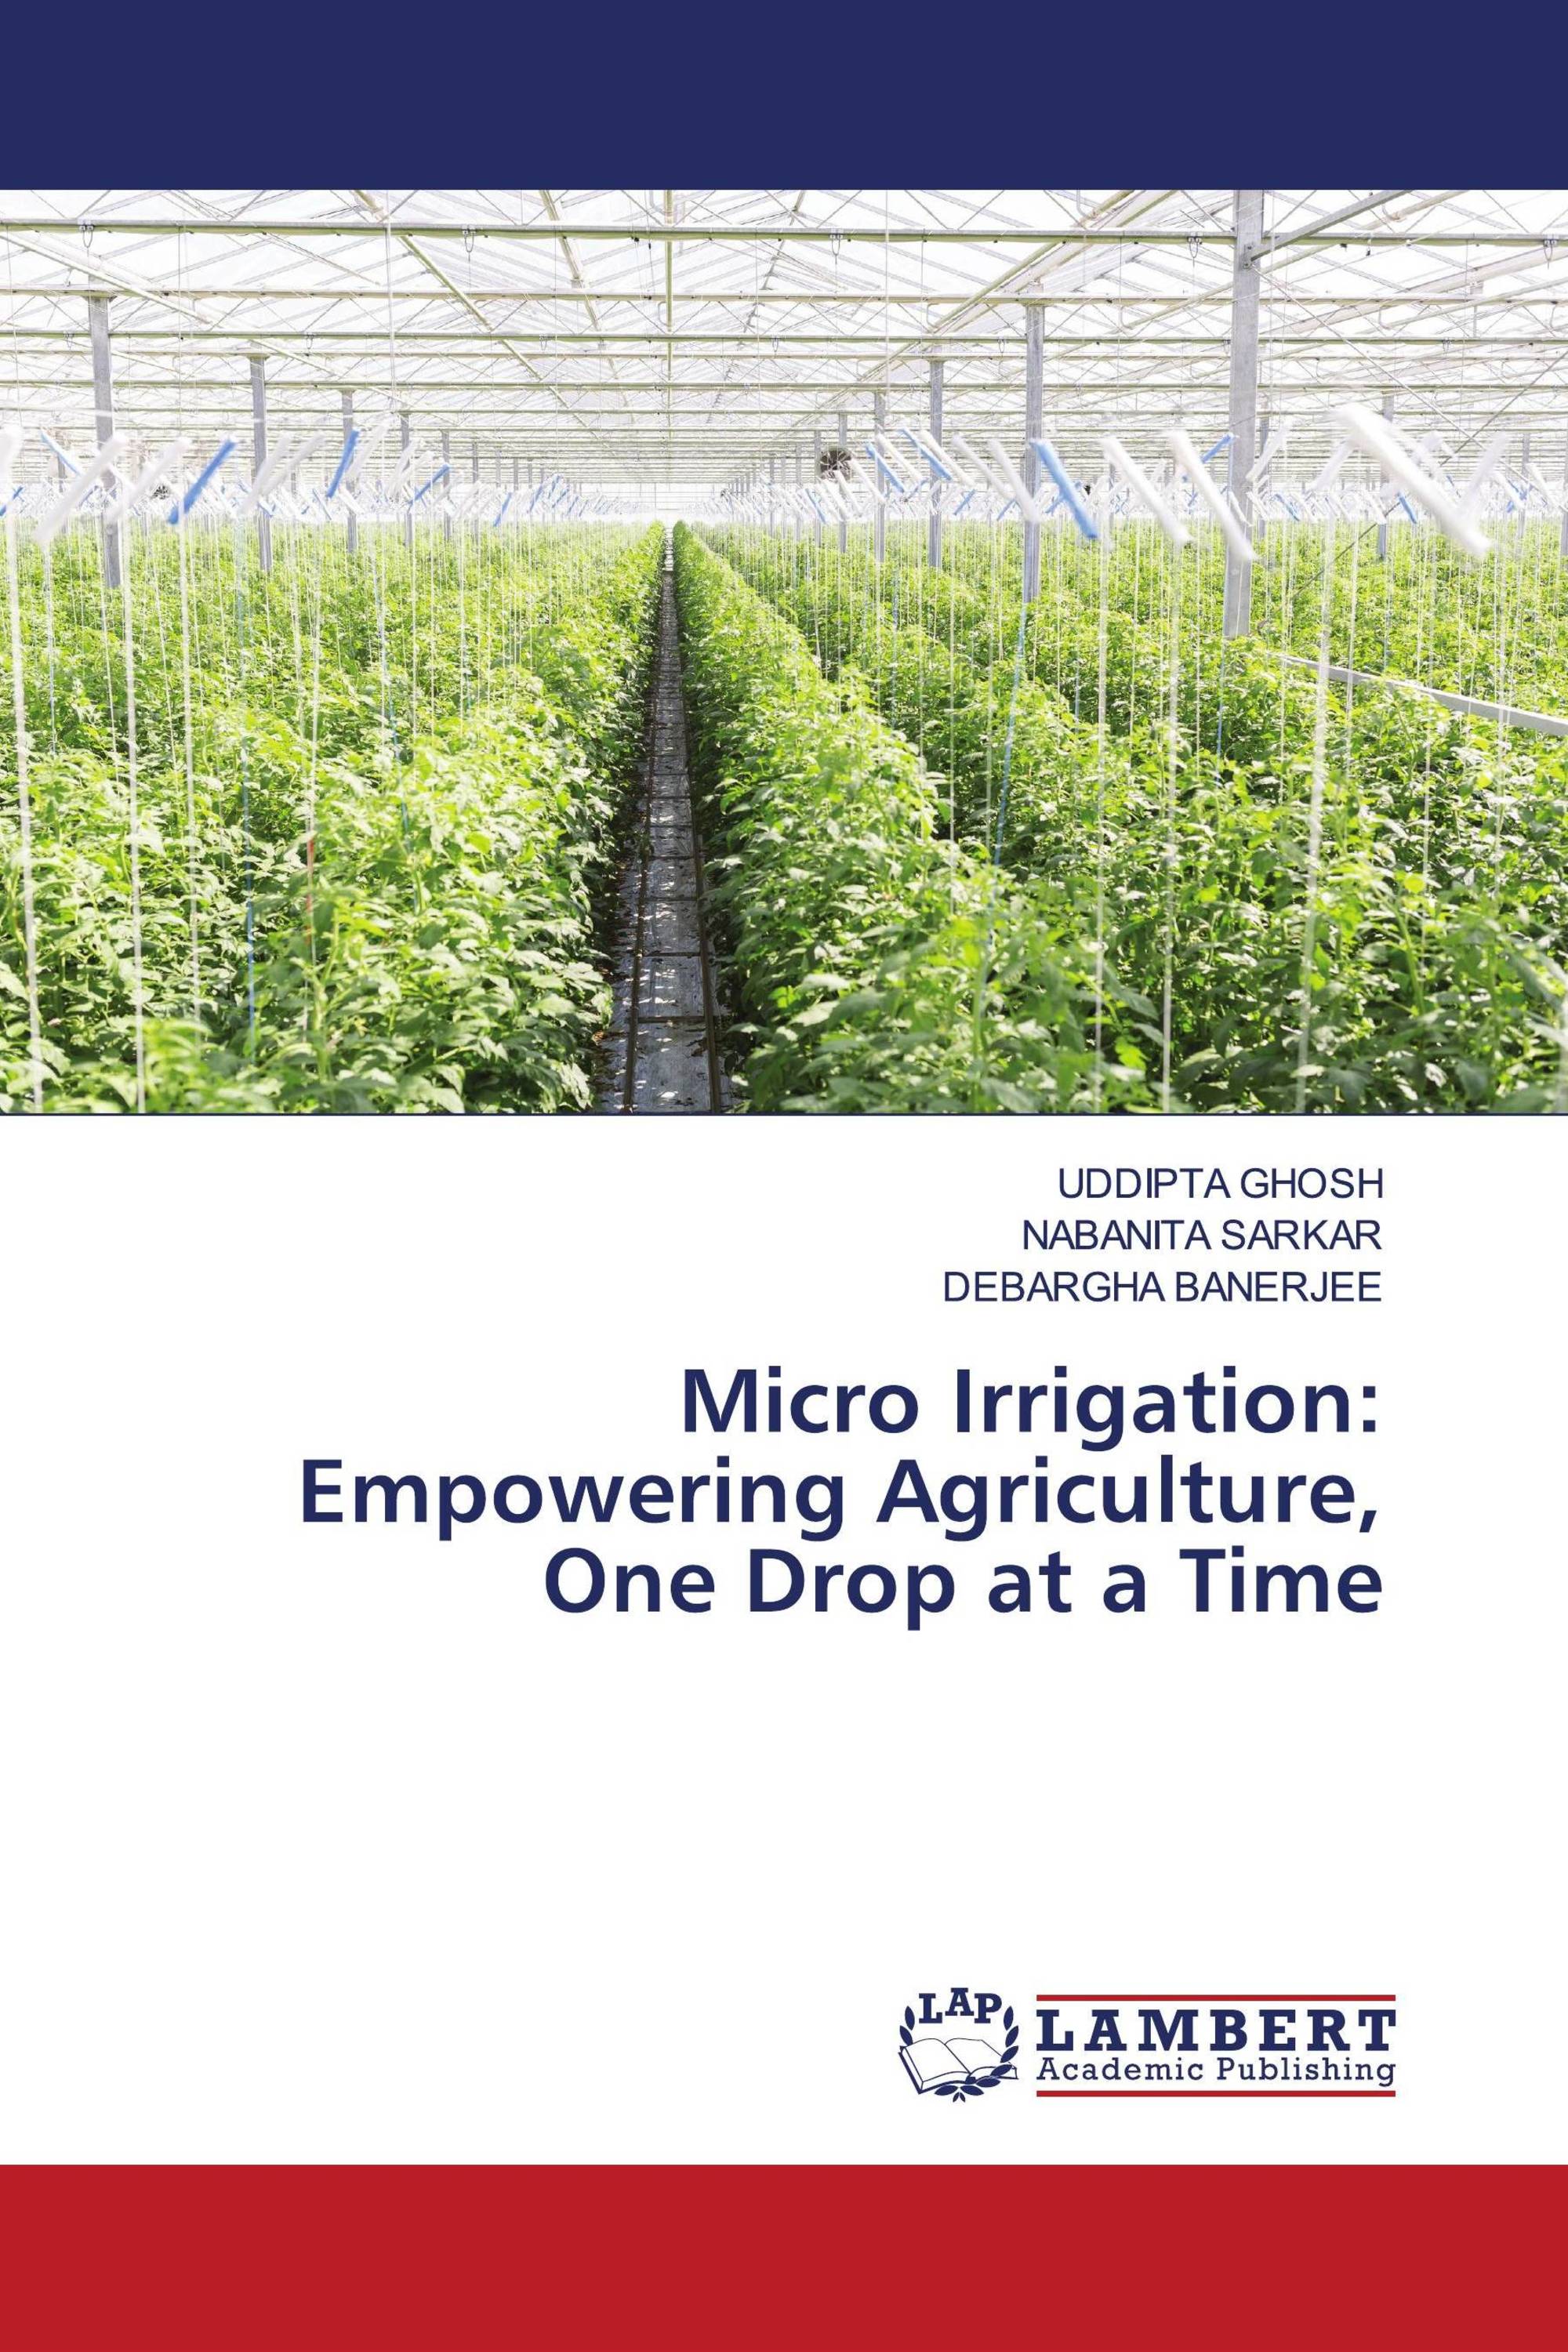 Micro Irrigation: Empowering Agriculture, One Drop at a Time